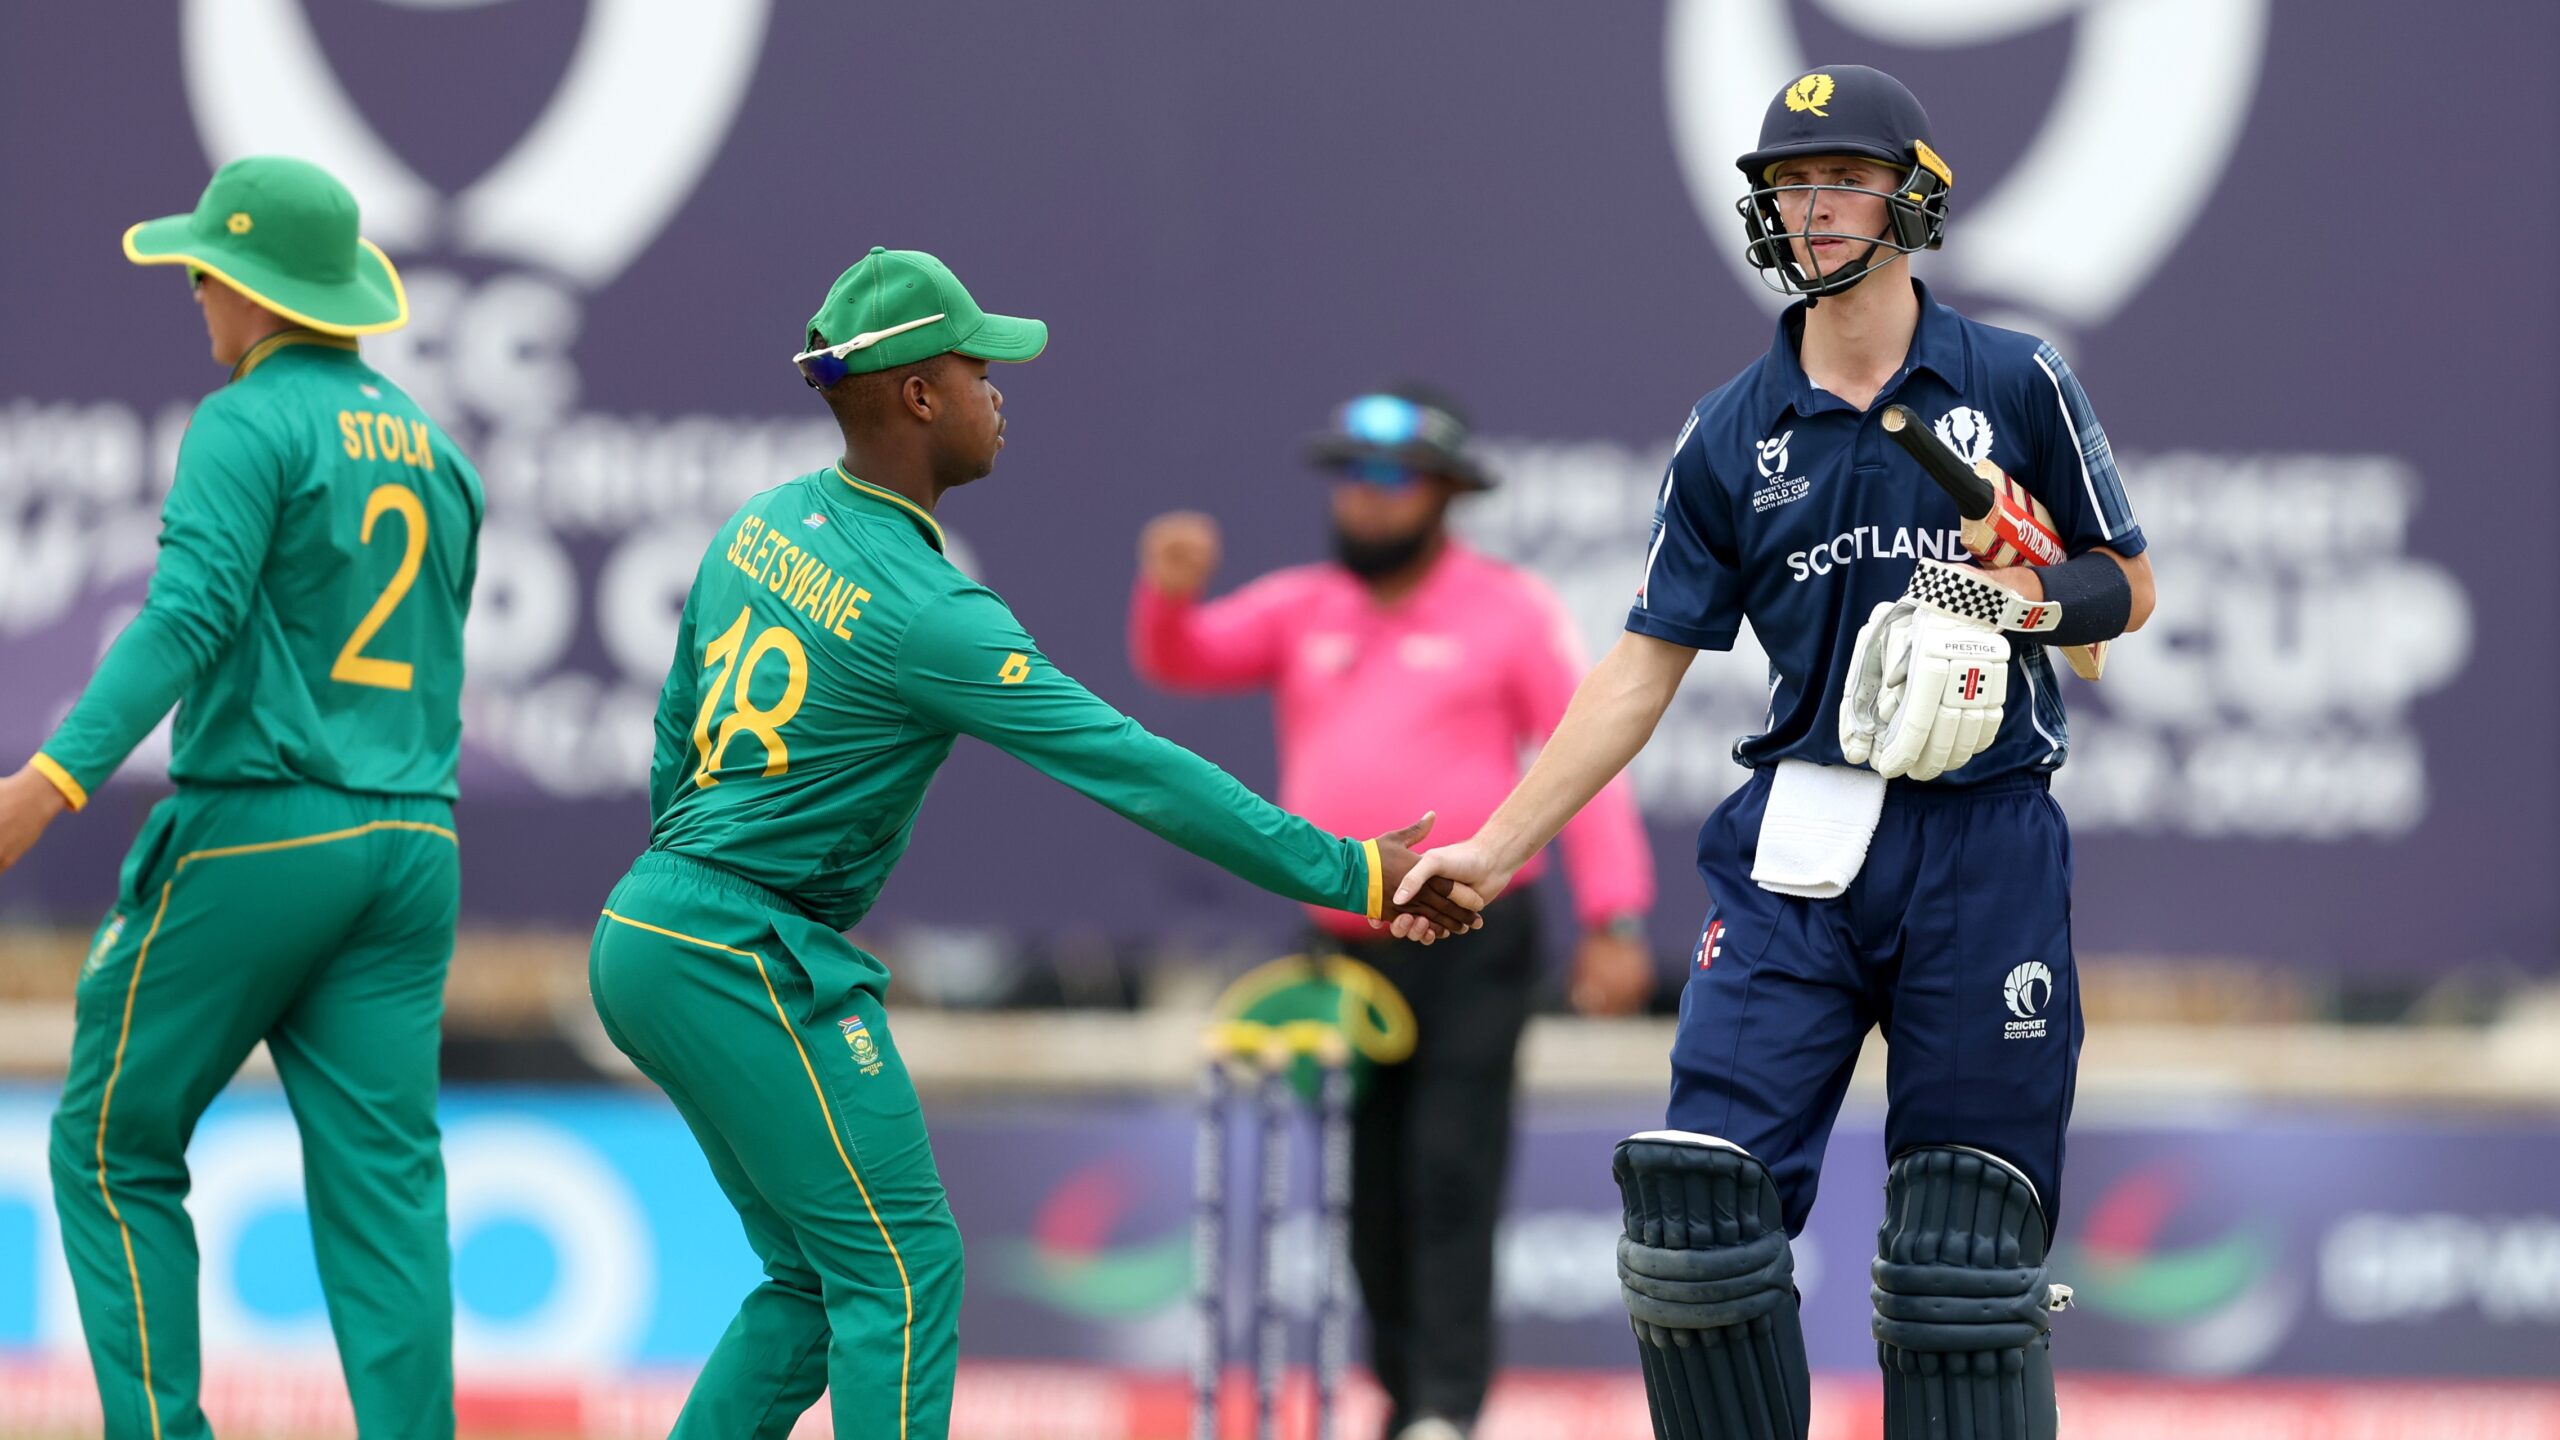 SOUTH AFRICA CHASE DOWN SCOTS TOTAL TO TOP GROUP